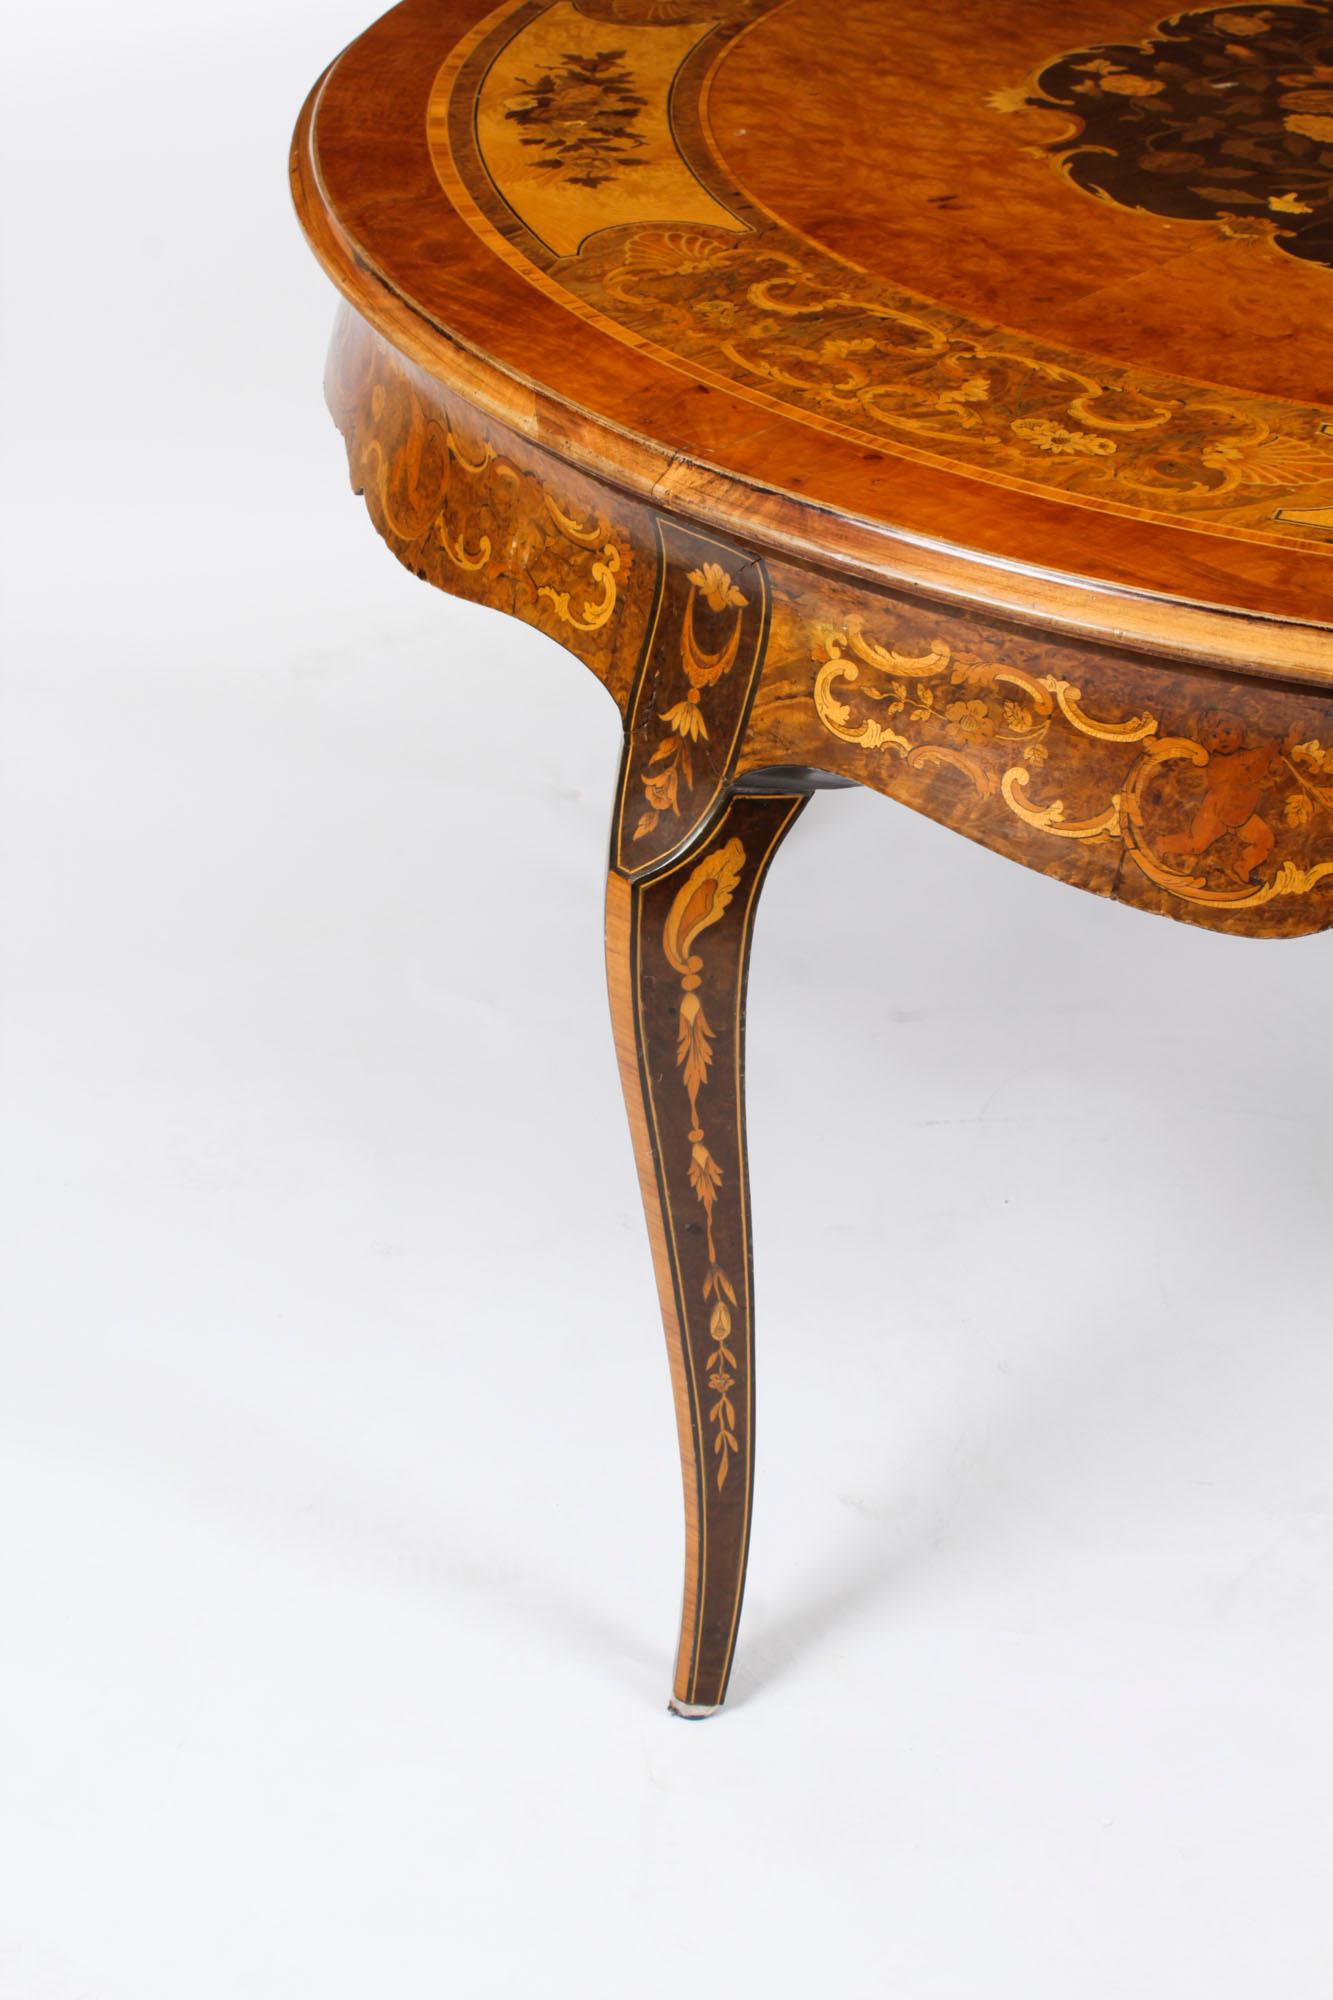 Antique Burr Walnut Marquetry Centre / Dining Table, Early 20th Century For Sale 2